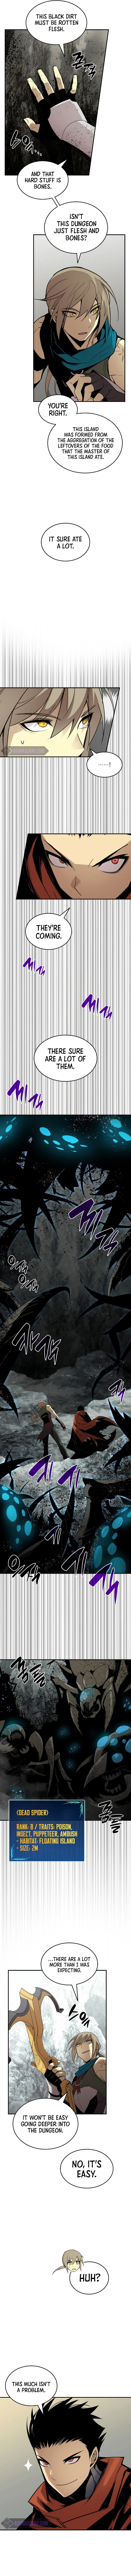 Worn and Torn Newbie Chapter 88 page 4